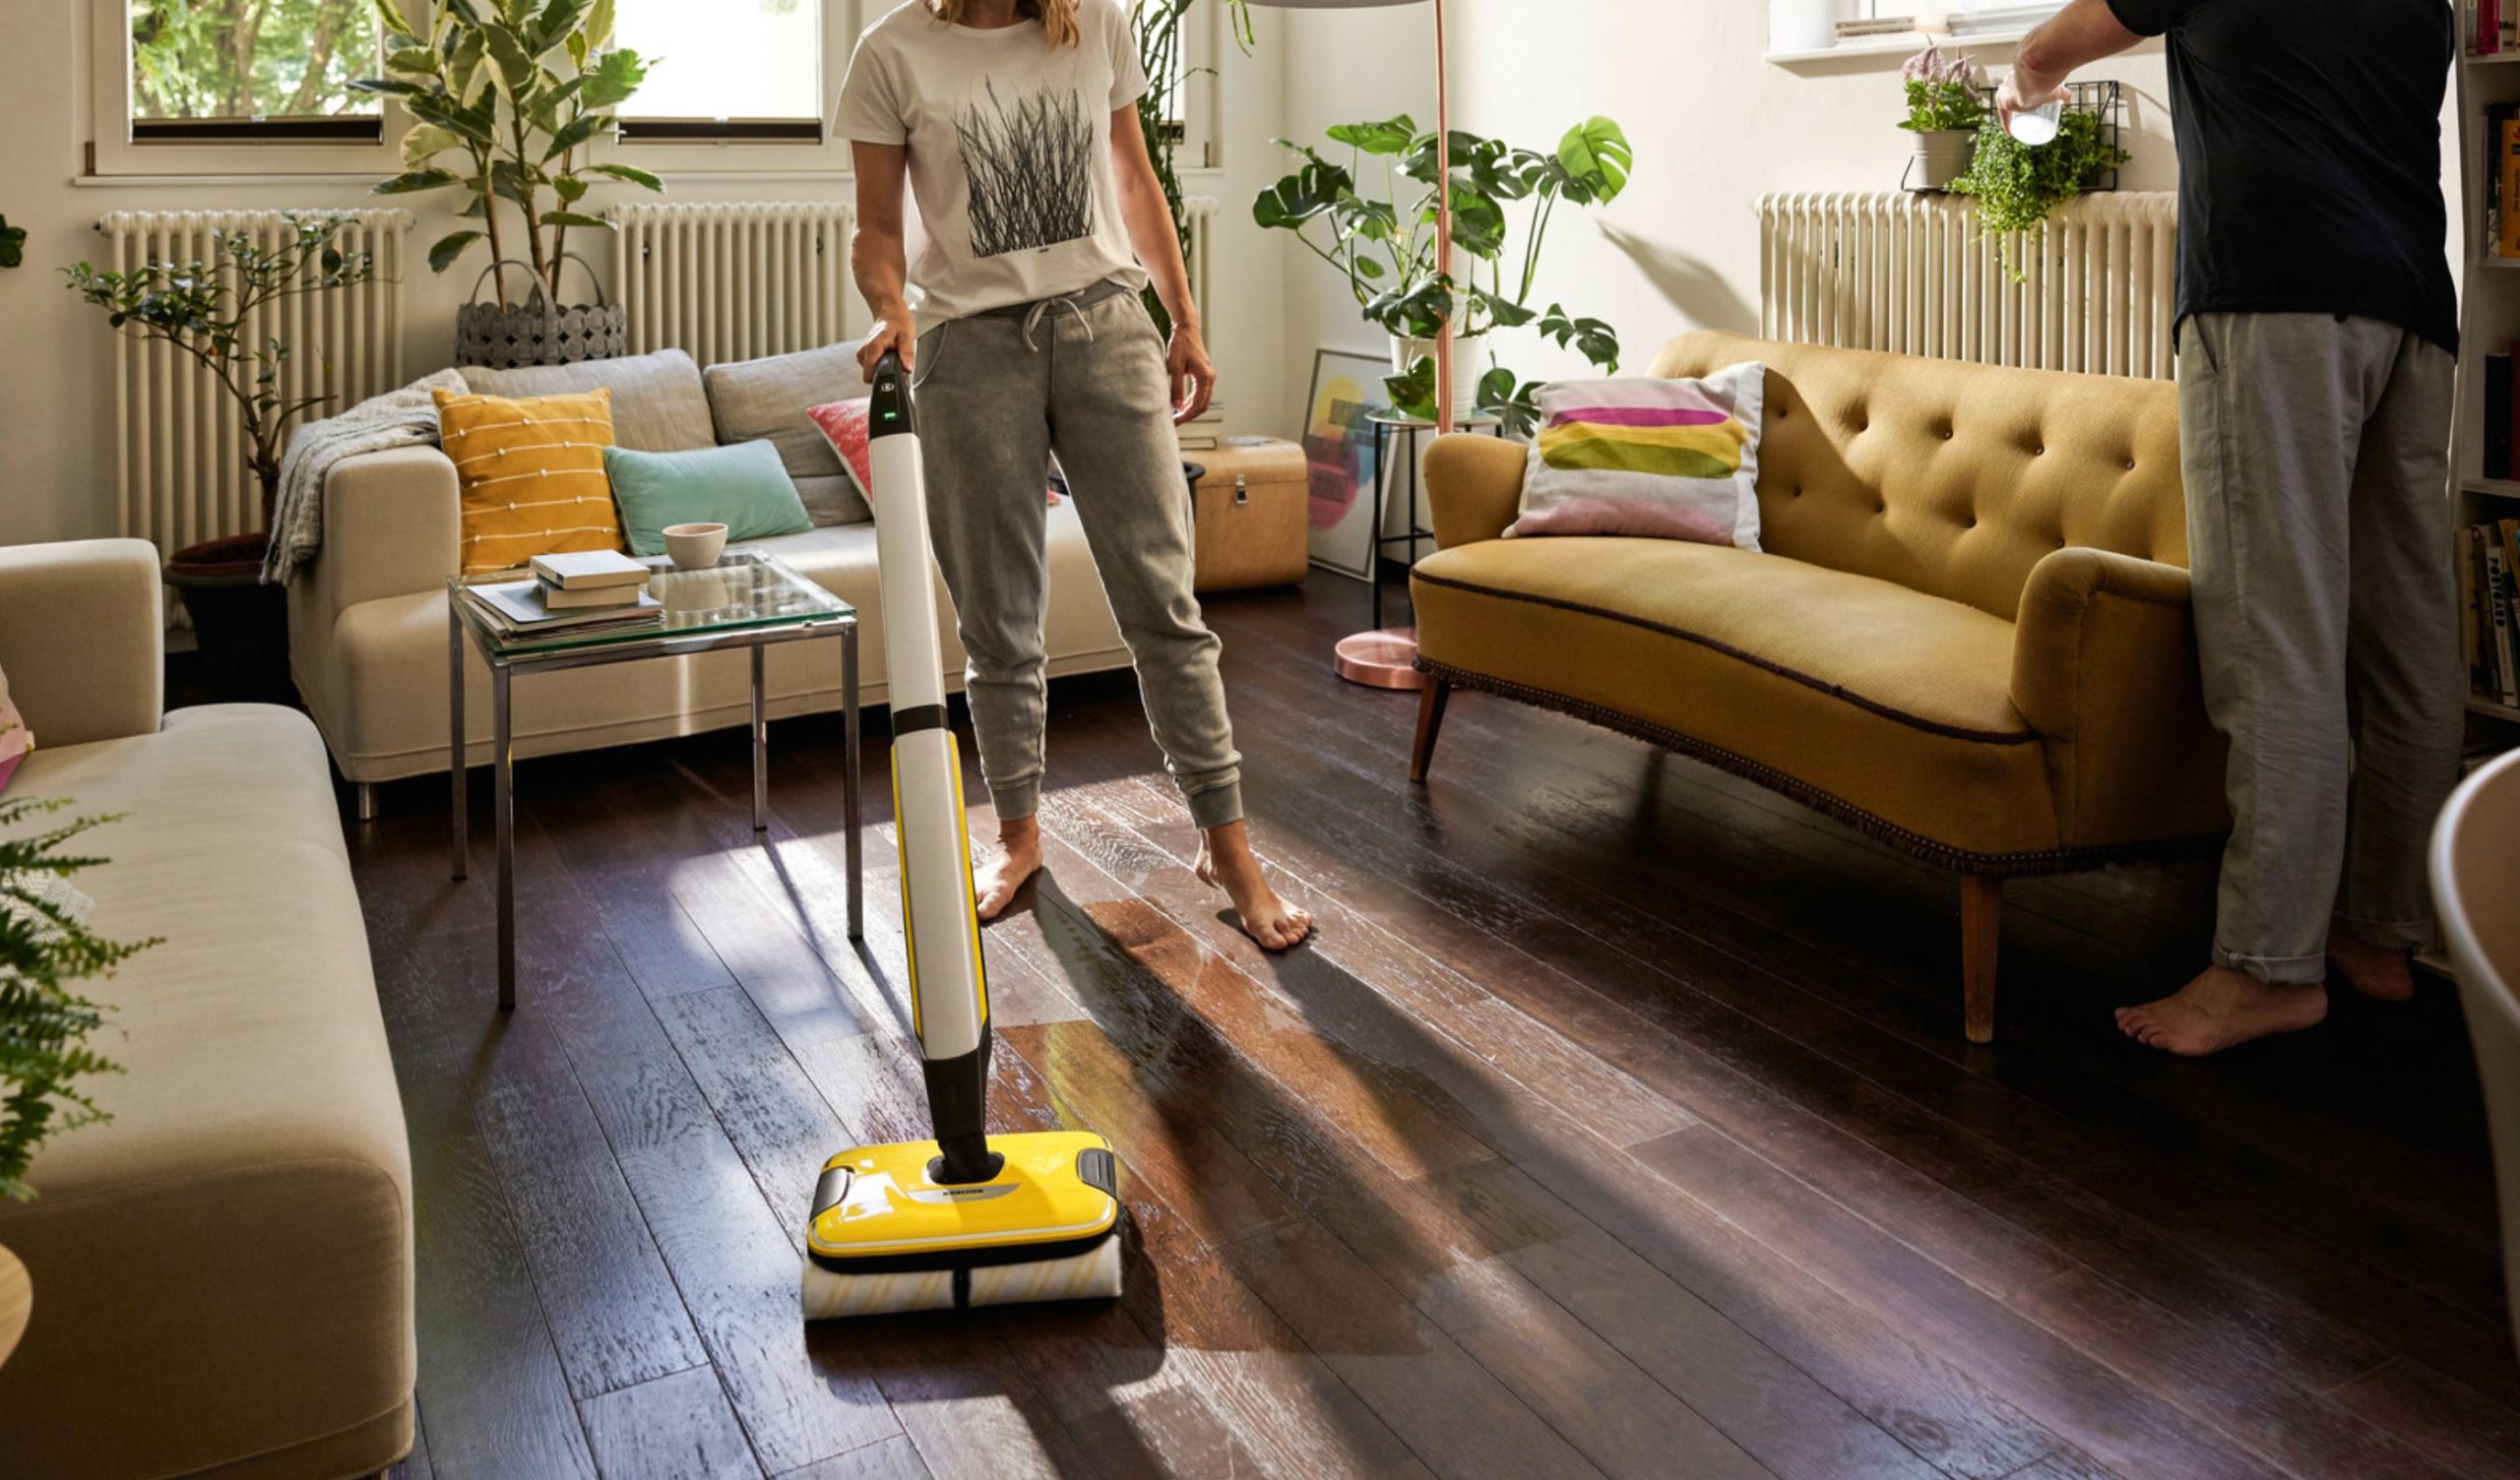 Kärcher FC 7 cordless power mop for a super effortless clean (cleaning rev...